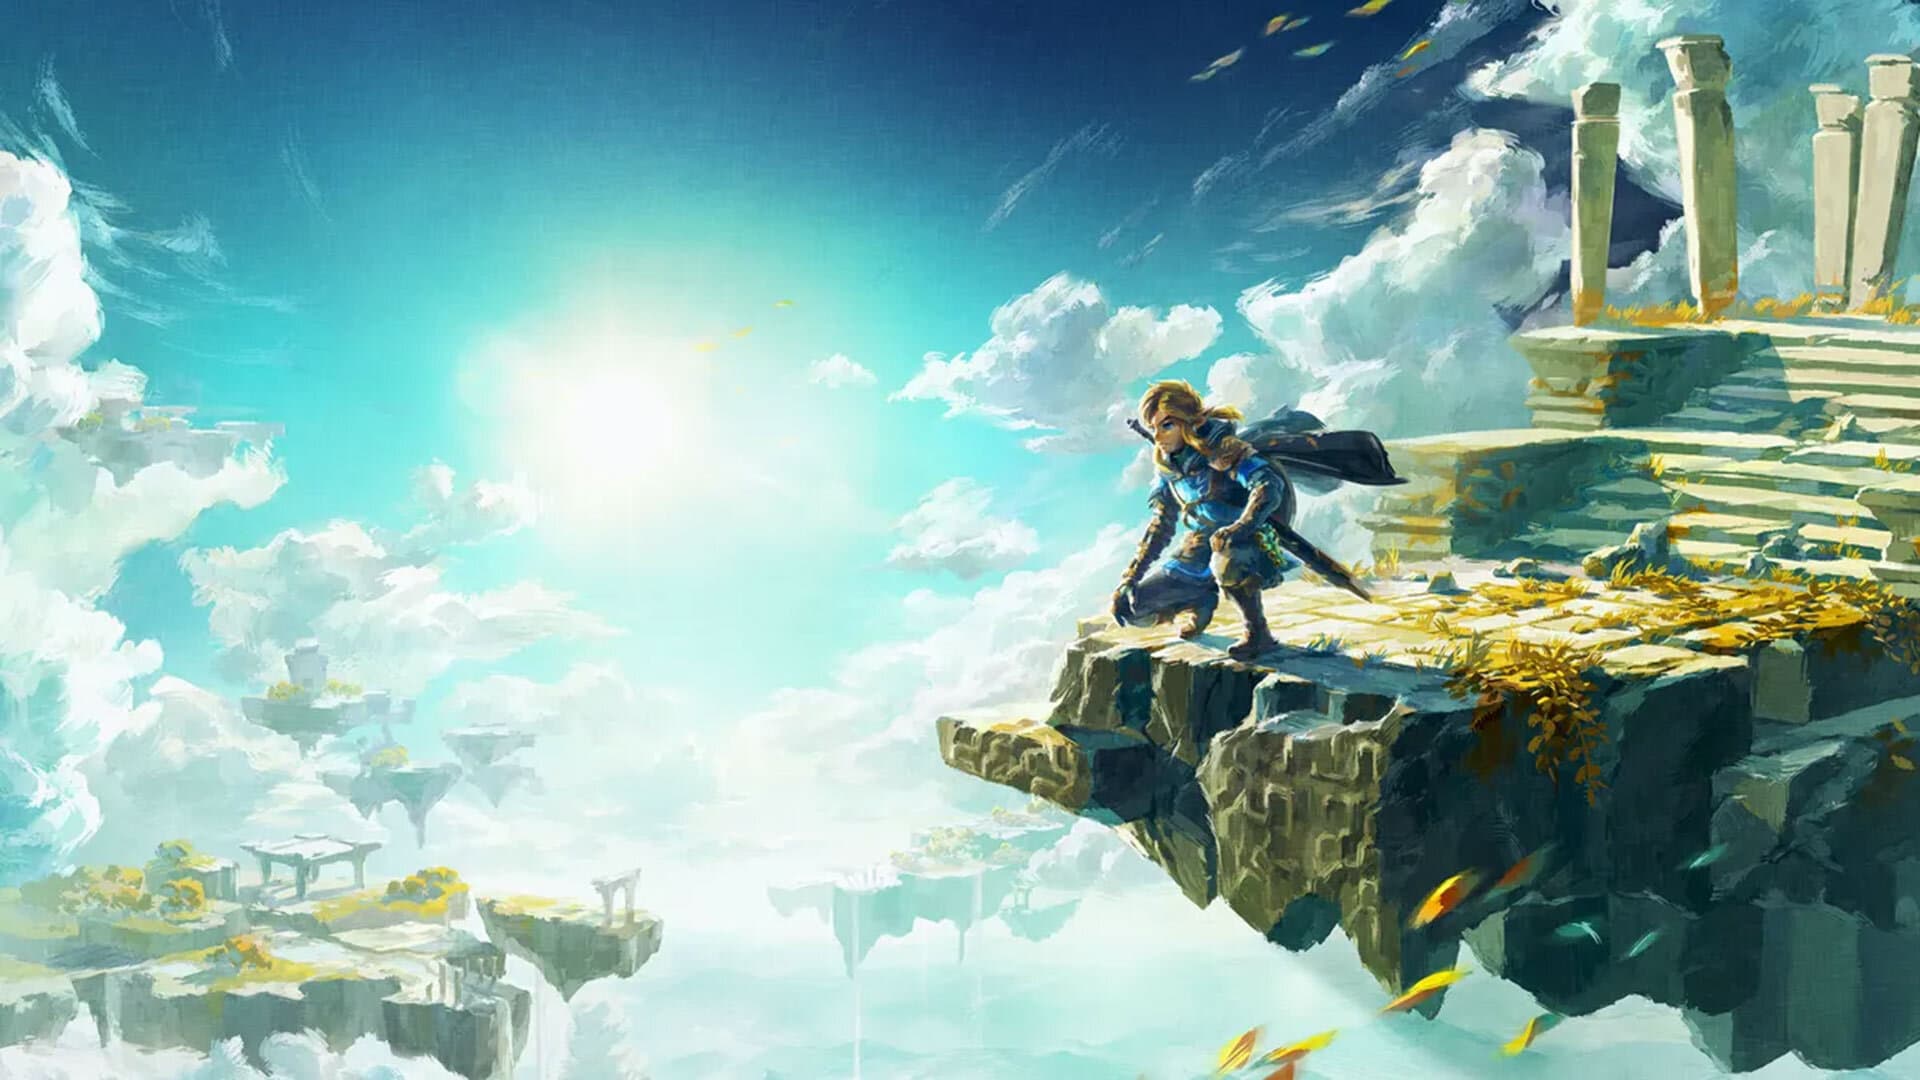 Video game still of a character with a sword on ruins in the sky among clouds